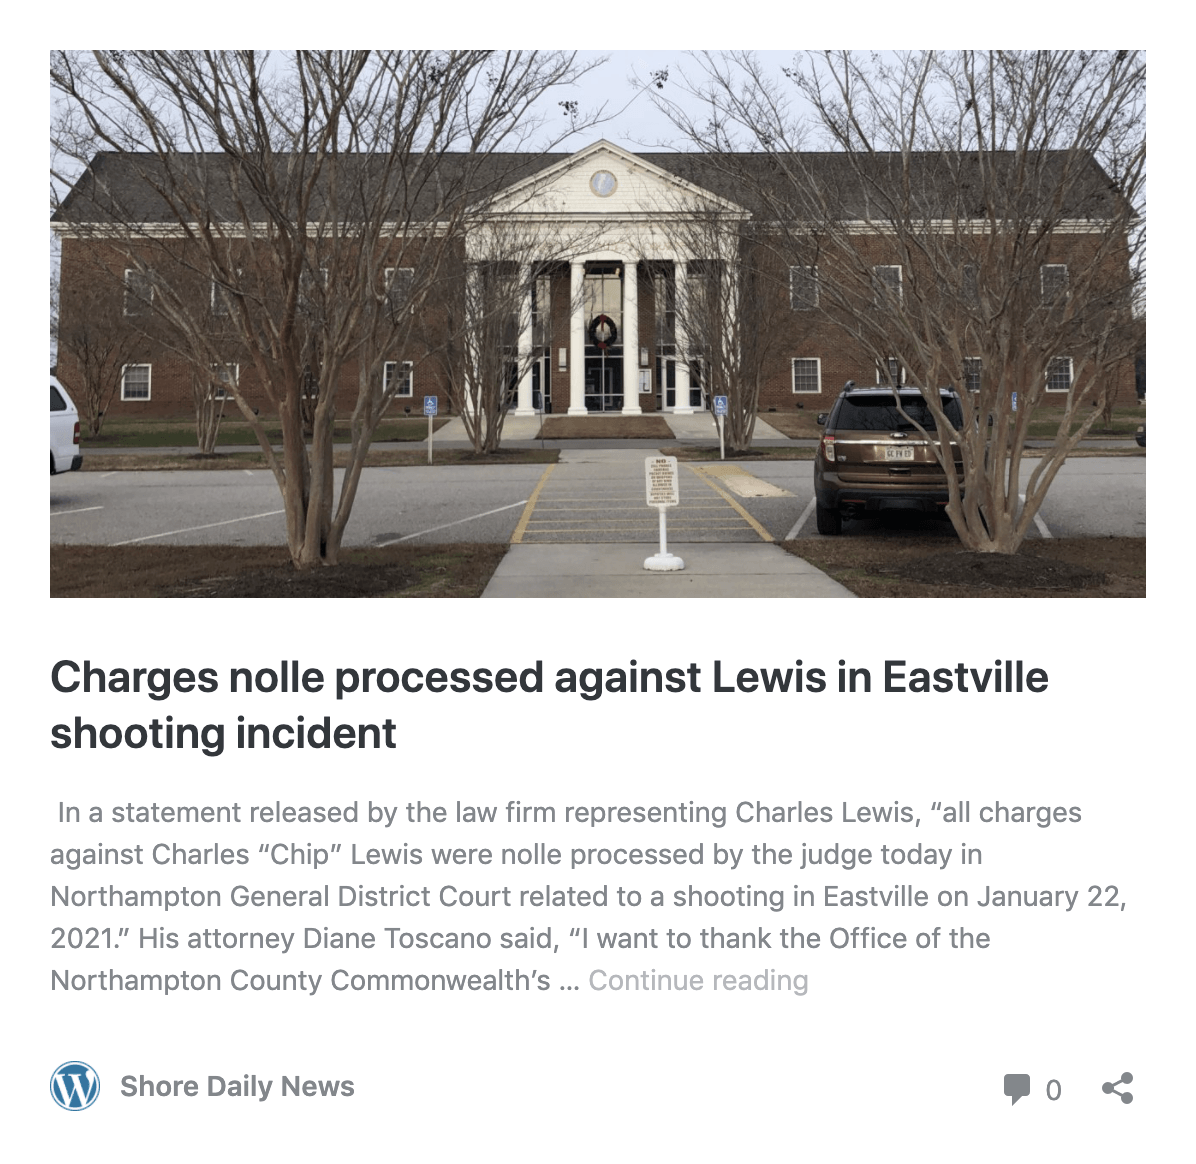 Charges nolle processed against Lewis in Eastville shooting incident